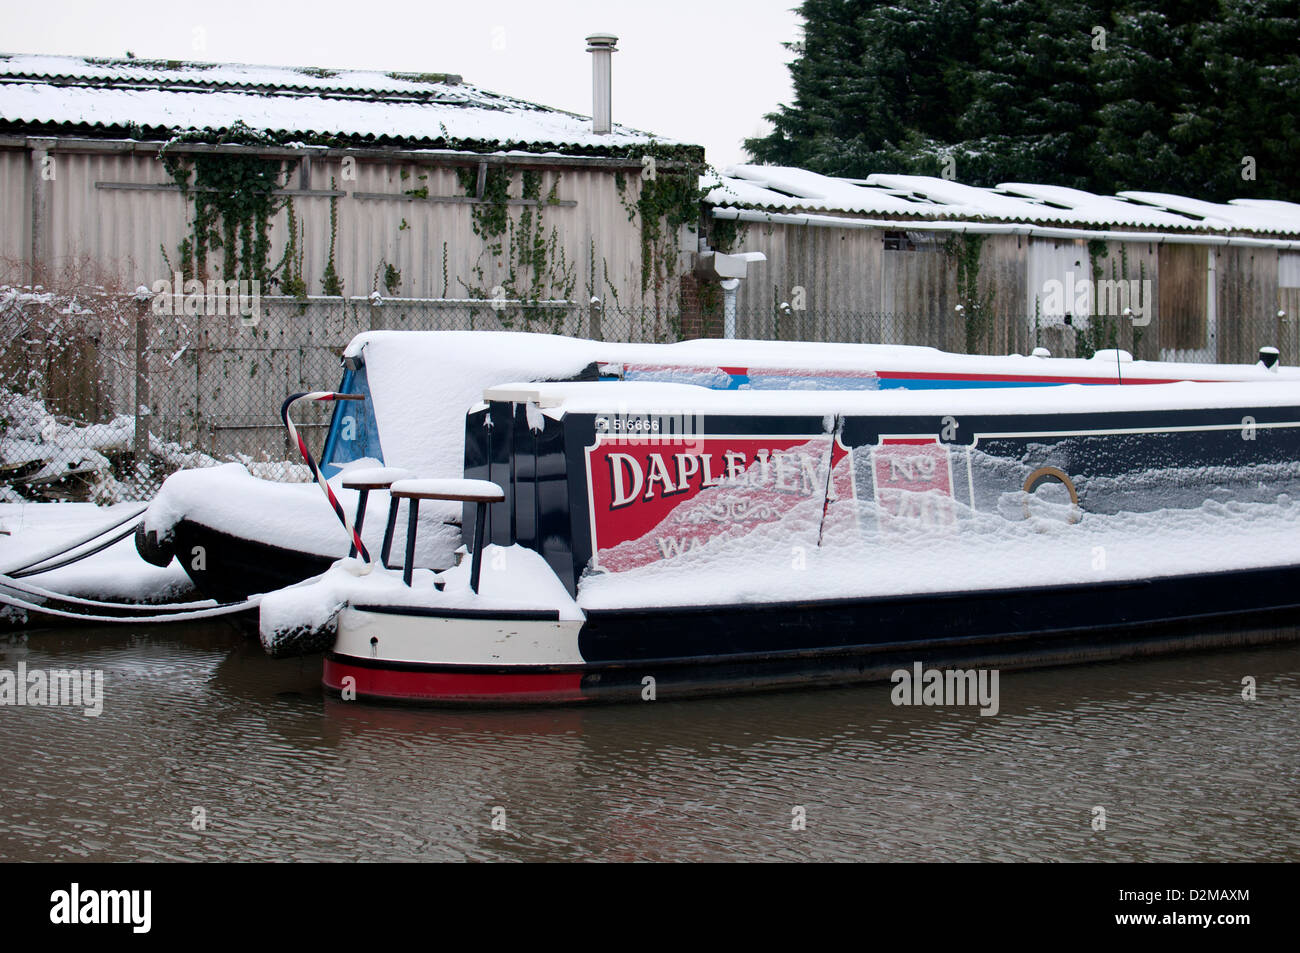 Narrowboats on Grand Union Canal in winter Stock Photo